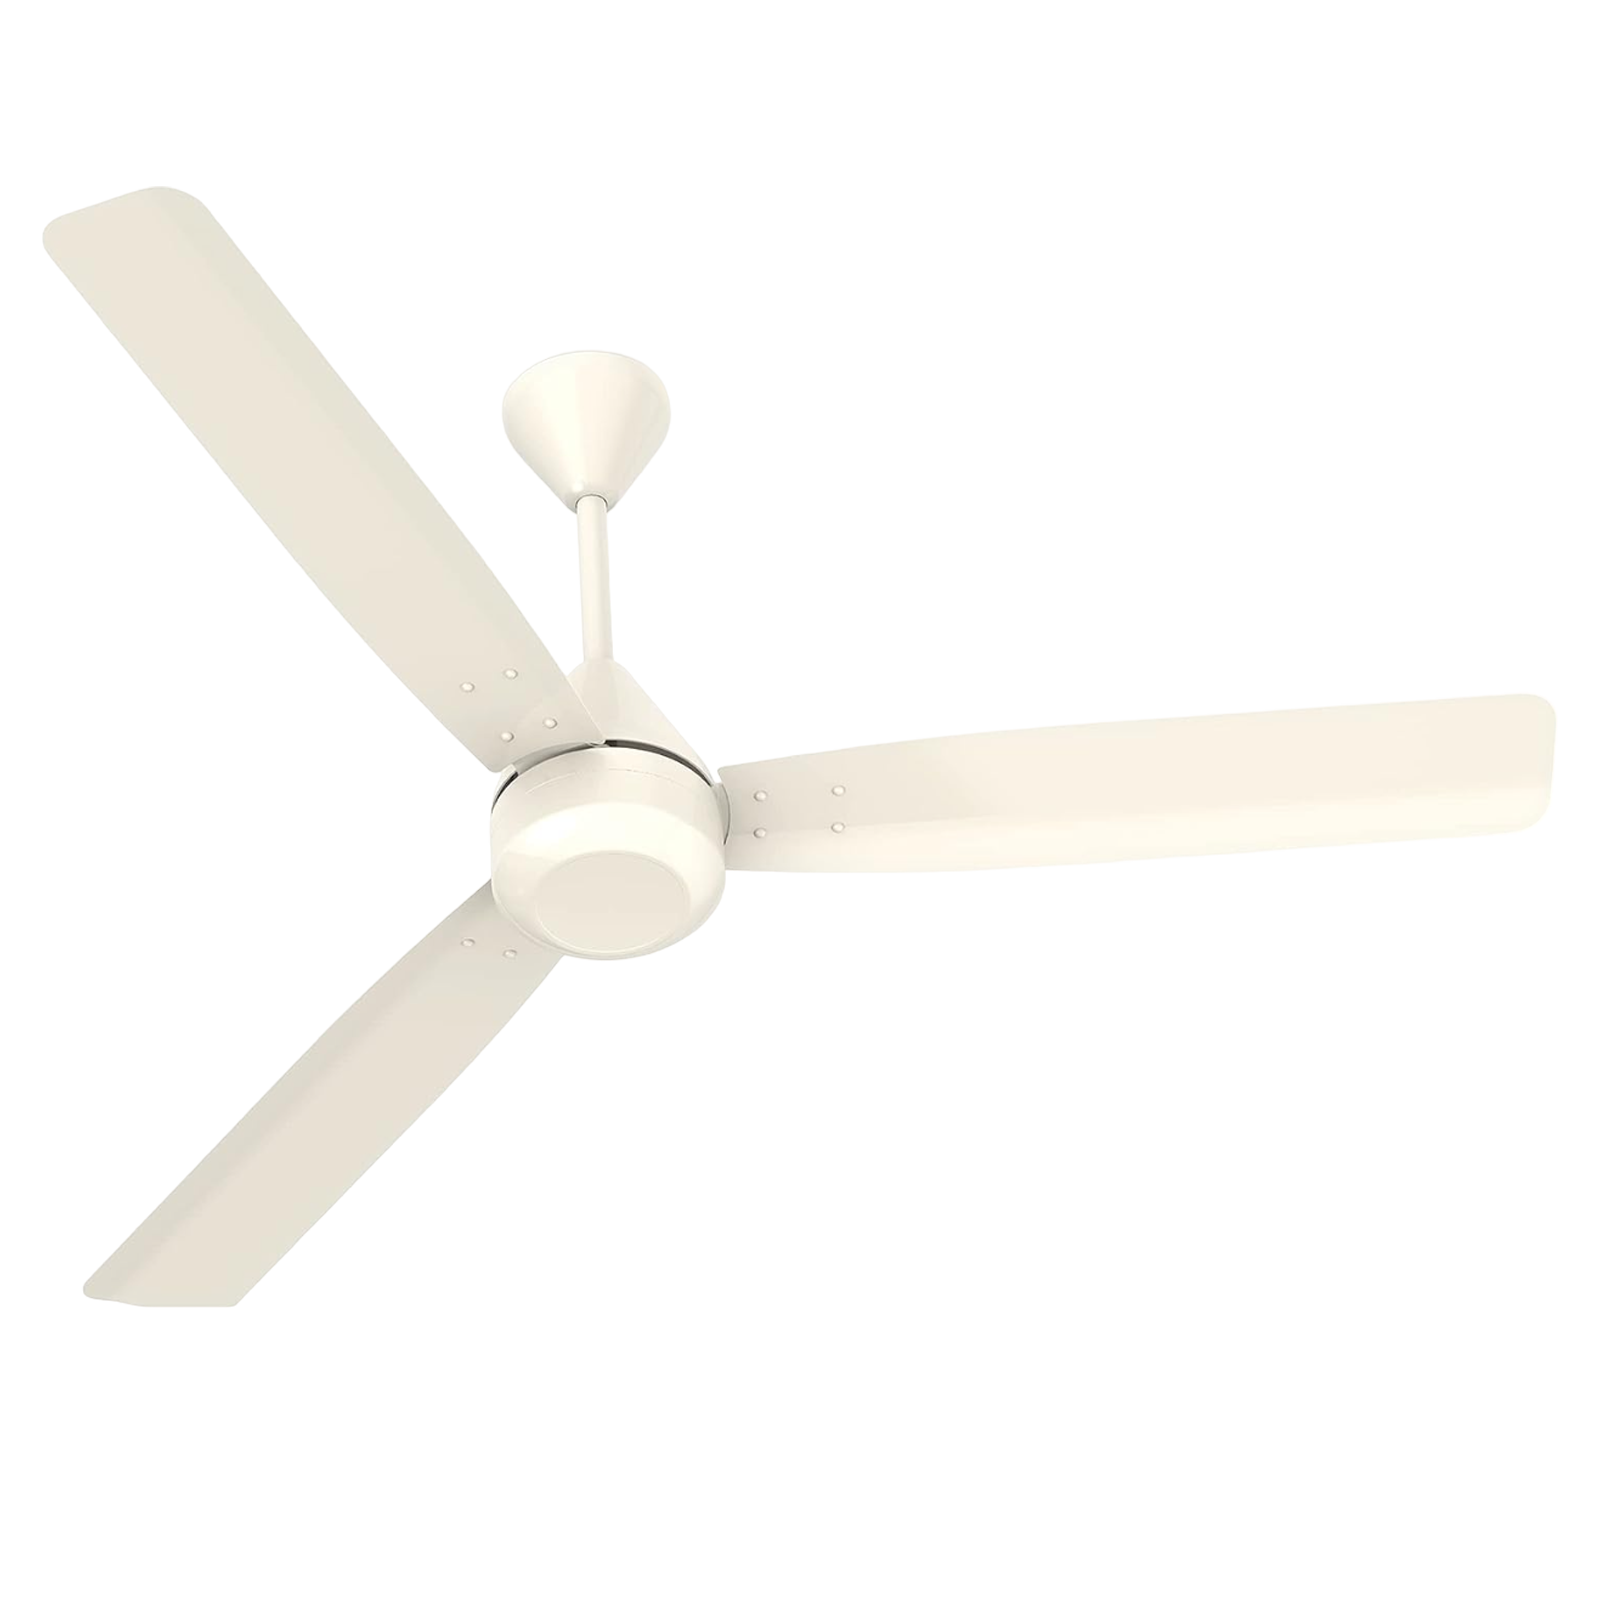 Crompton Energion Cromair 5 Star 1200mm 3 Blade BLDC Motor Ceiling Fan with Remote (Double Ball Bearing, Ivory)